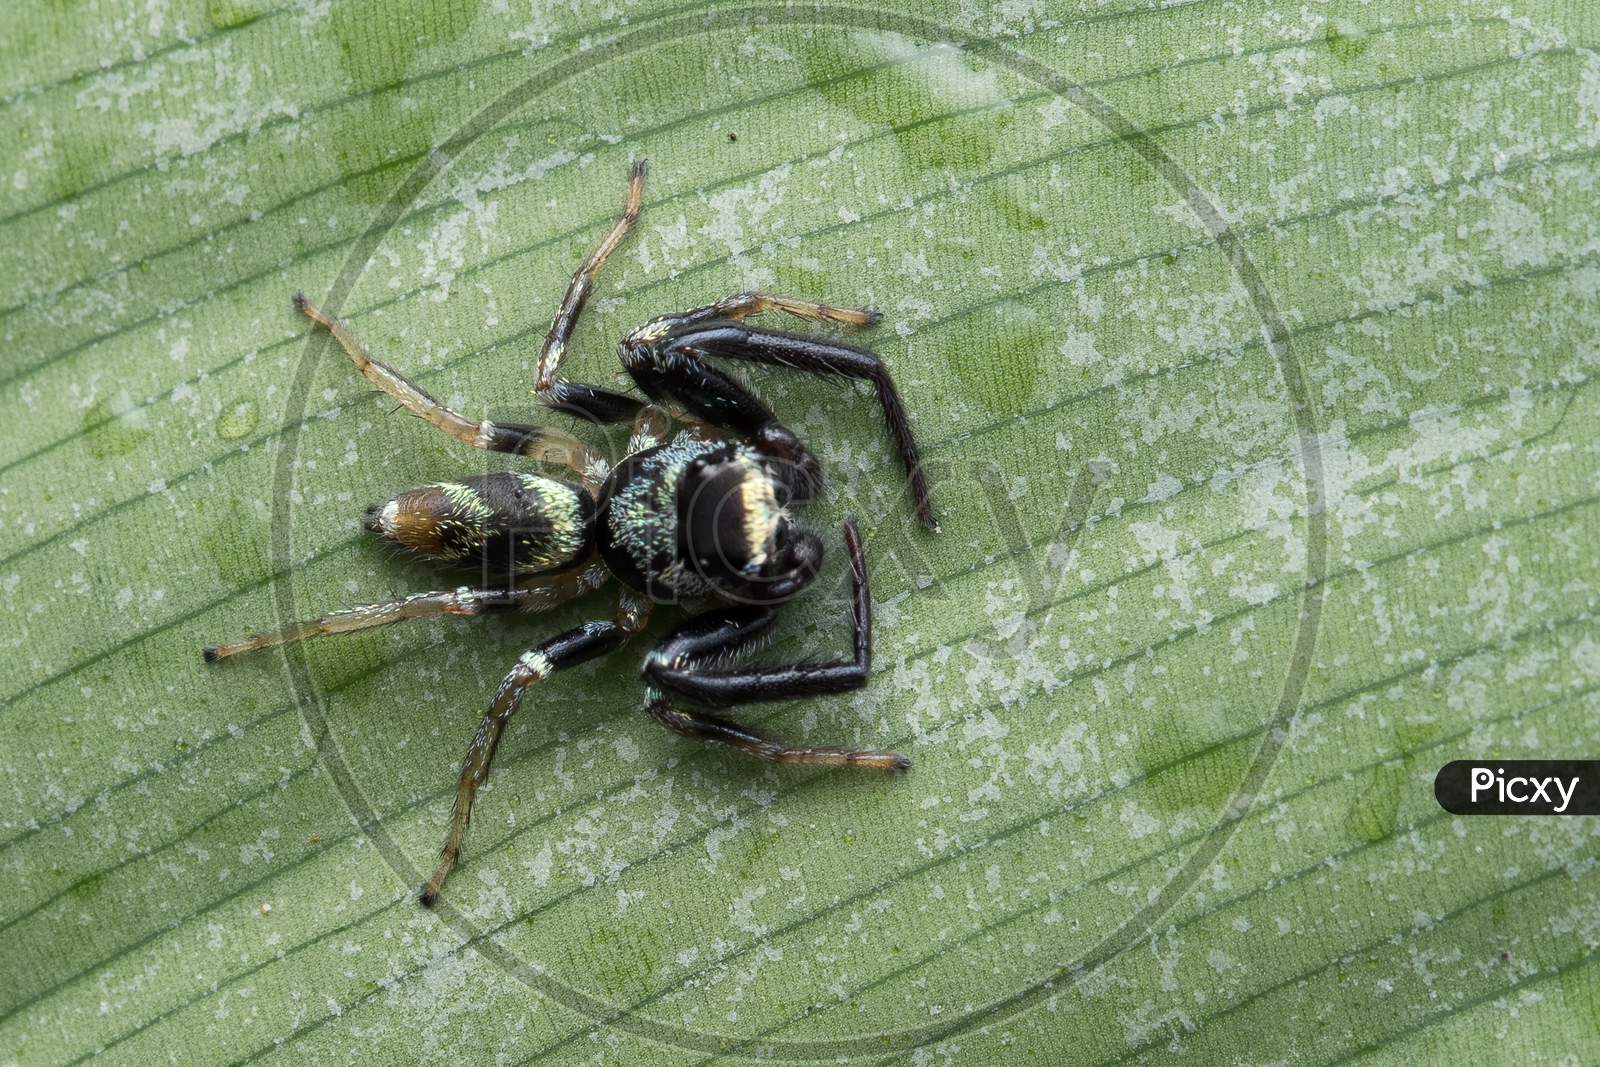 Dorsal Of Thiana Bahomensis Fighting Spider Resting On A Leaf